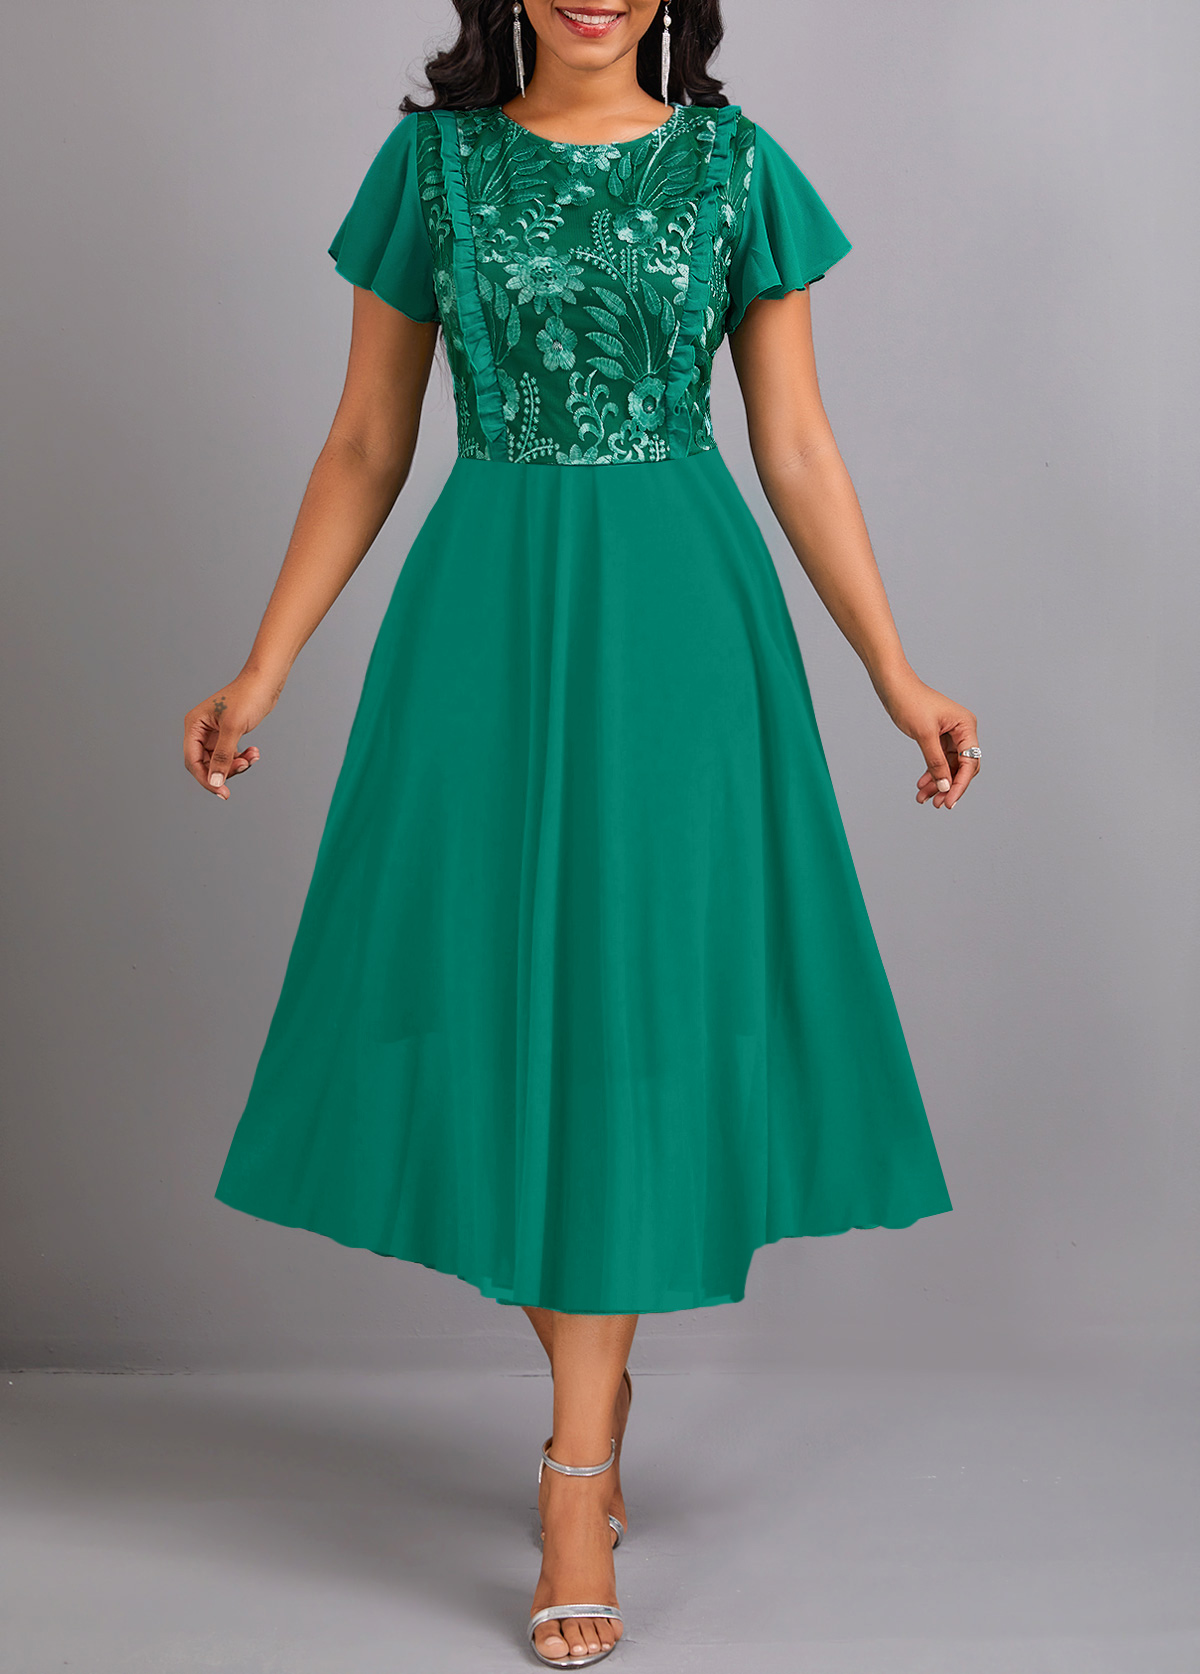 Lace Frill Green Round Neck Short Sleeve Dress | Rosewe.com - USD $42.98